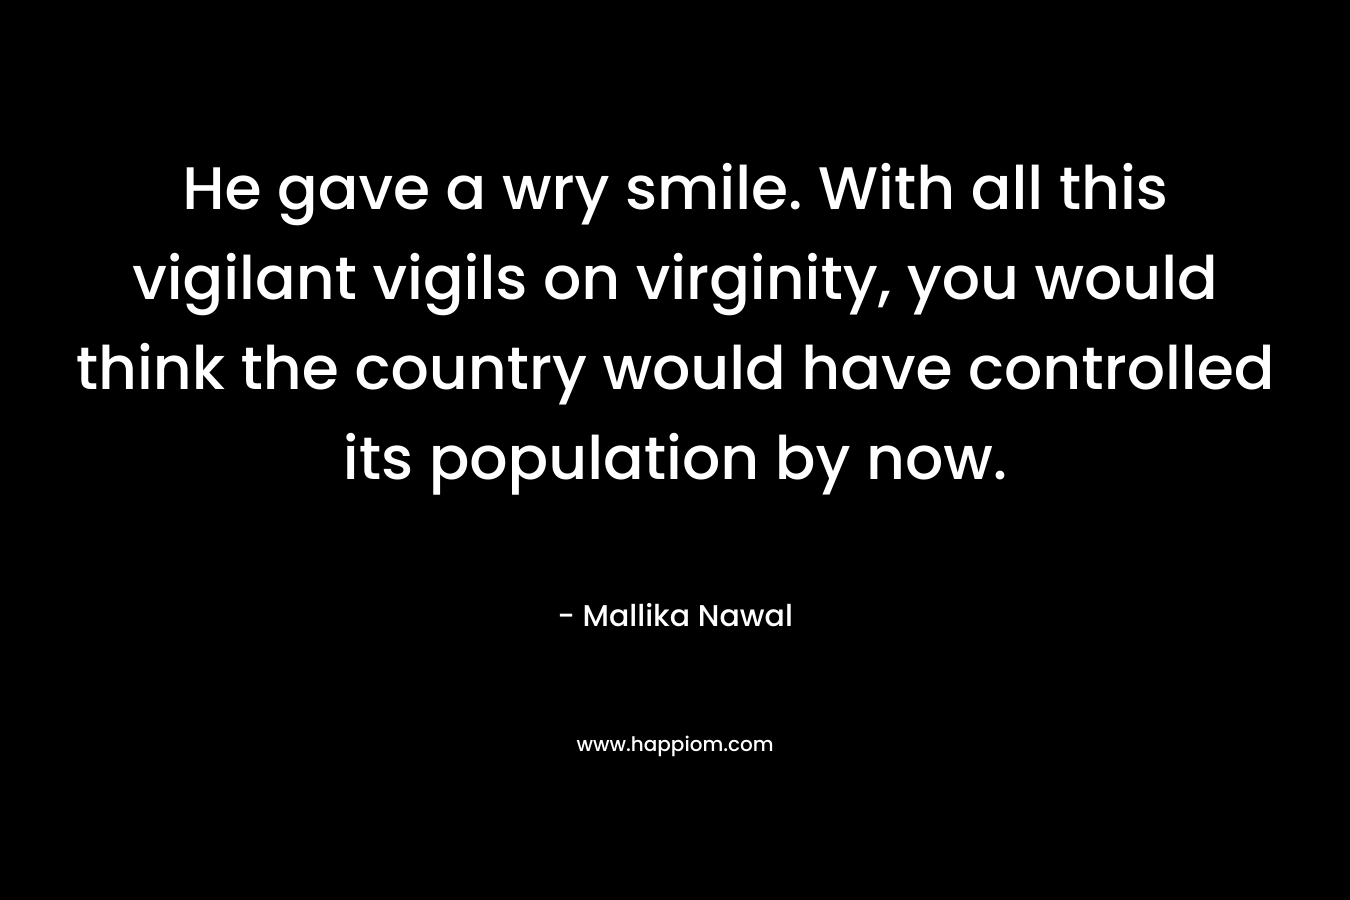 He gave a wry smile. With all this vigilant vigils on virginity, you would think the country would have controlled its population by now. – Mallika Nawal